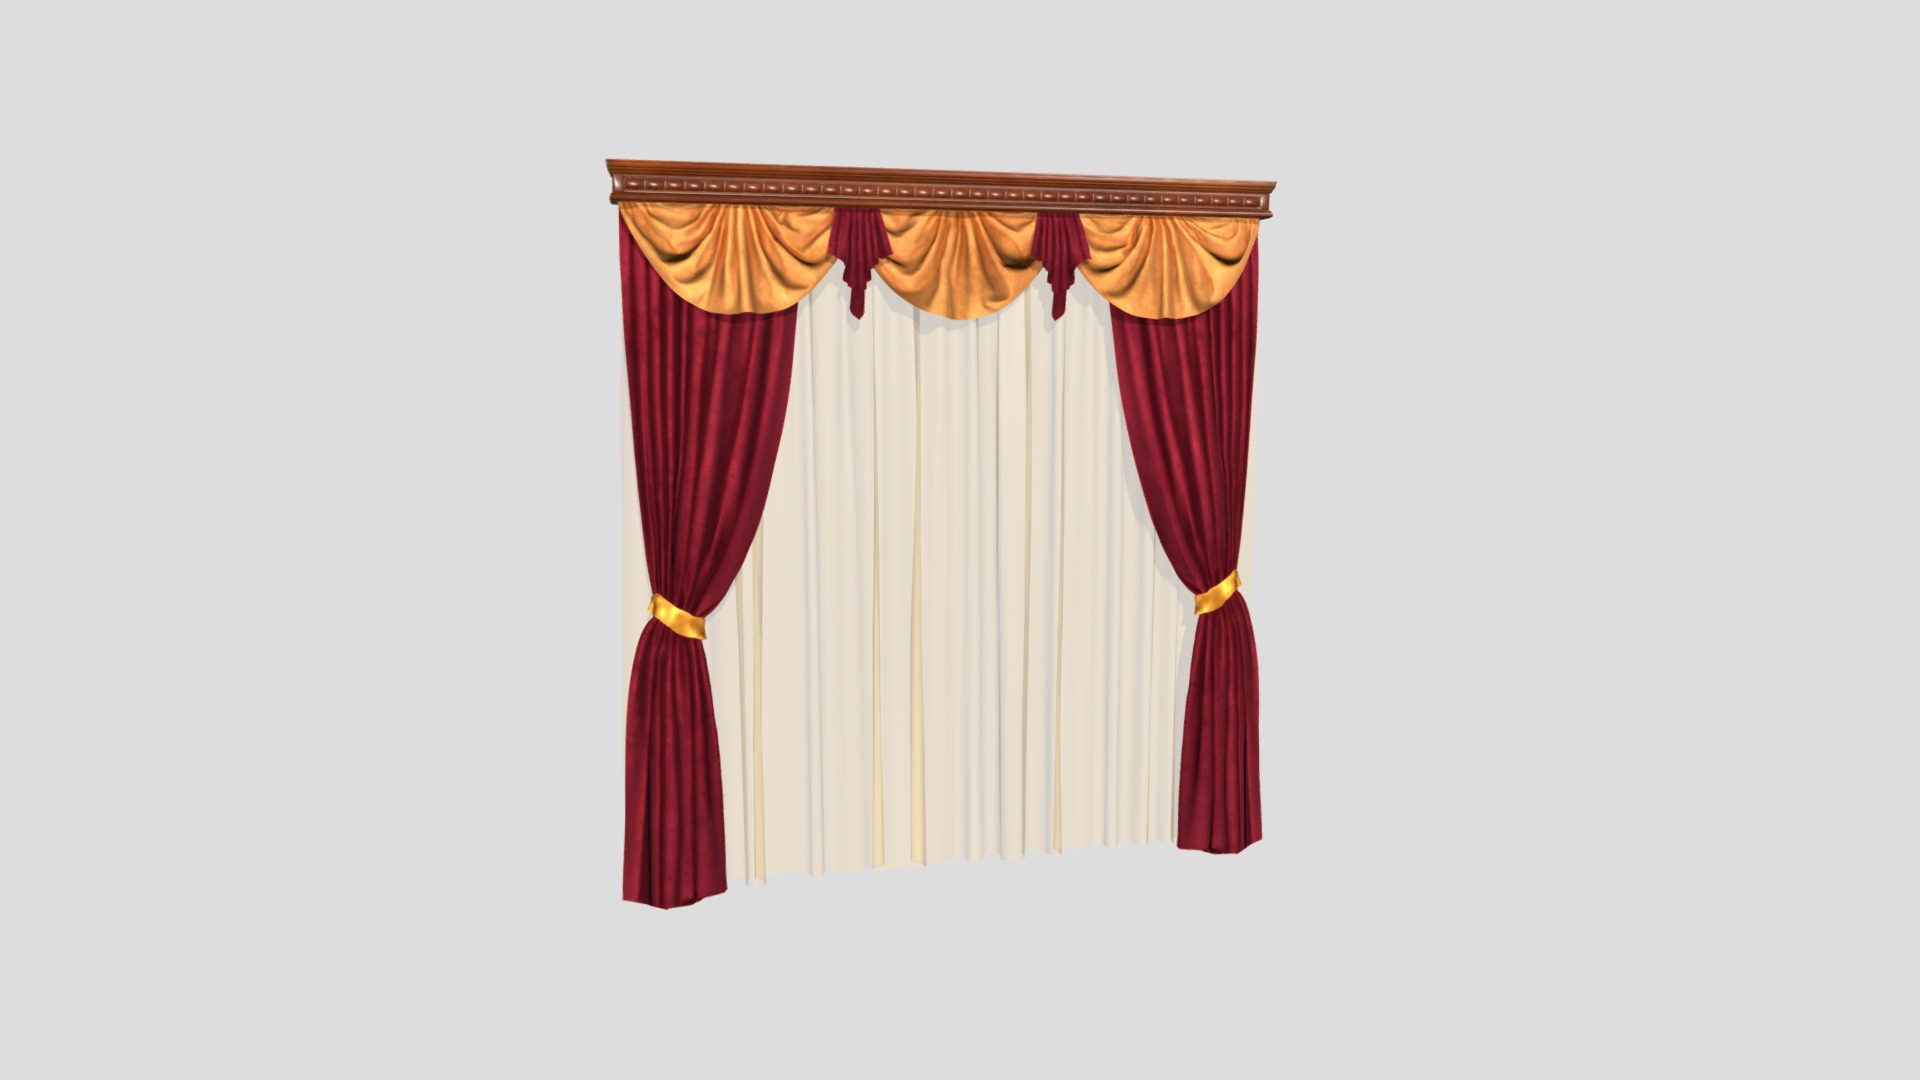 3D model №803 Curtain  3D low poly model for VR-projects - This is a 3D model of the №803 Curtain  3D low poly model for VR-projects. The 3D model is about a pair of curtains.